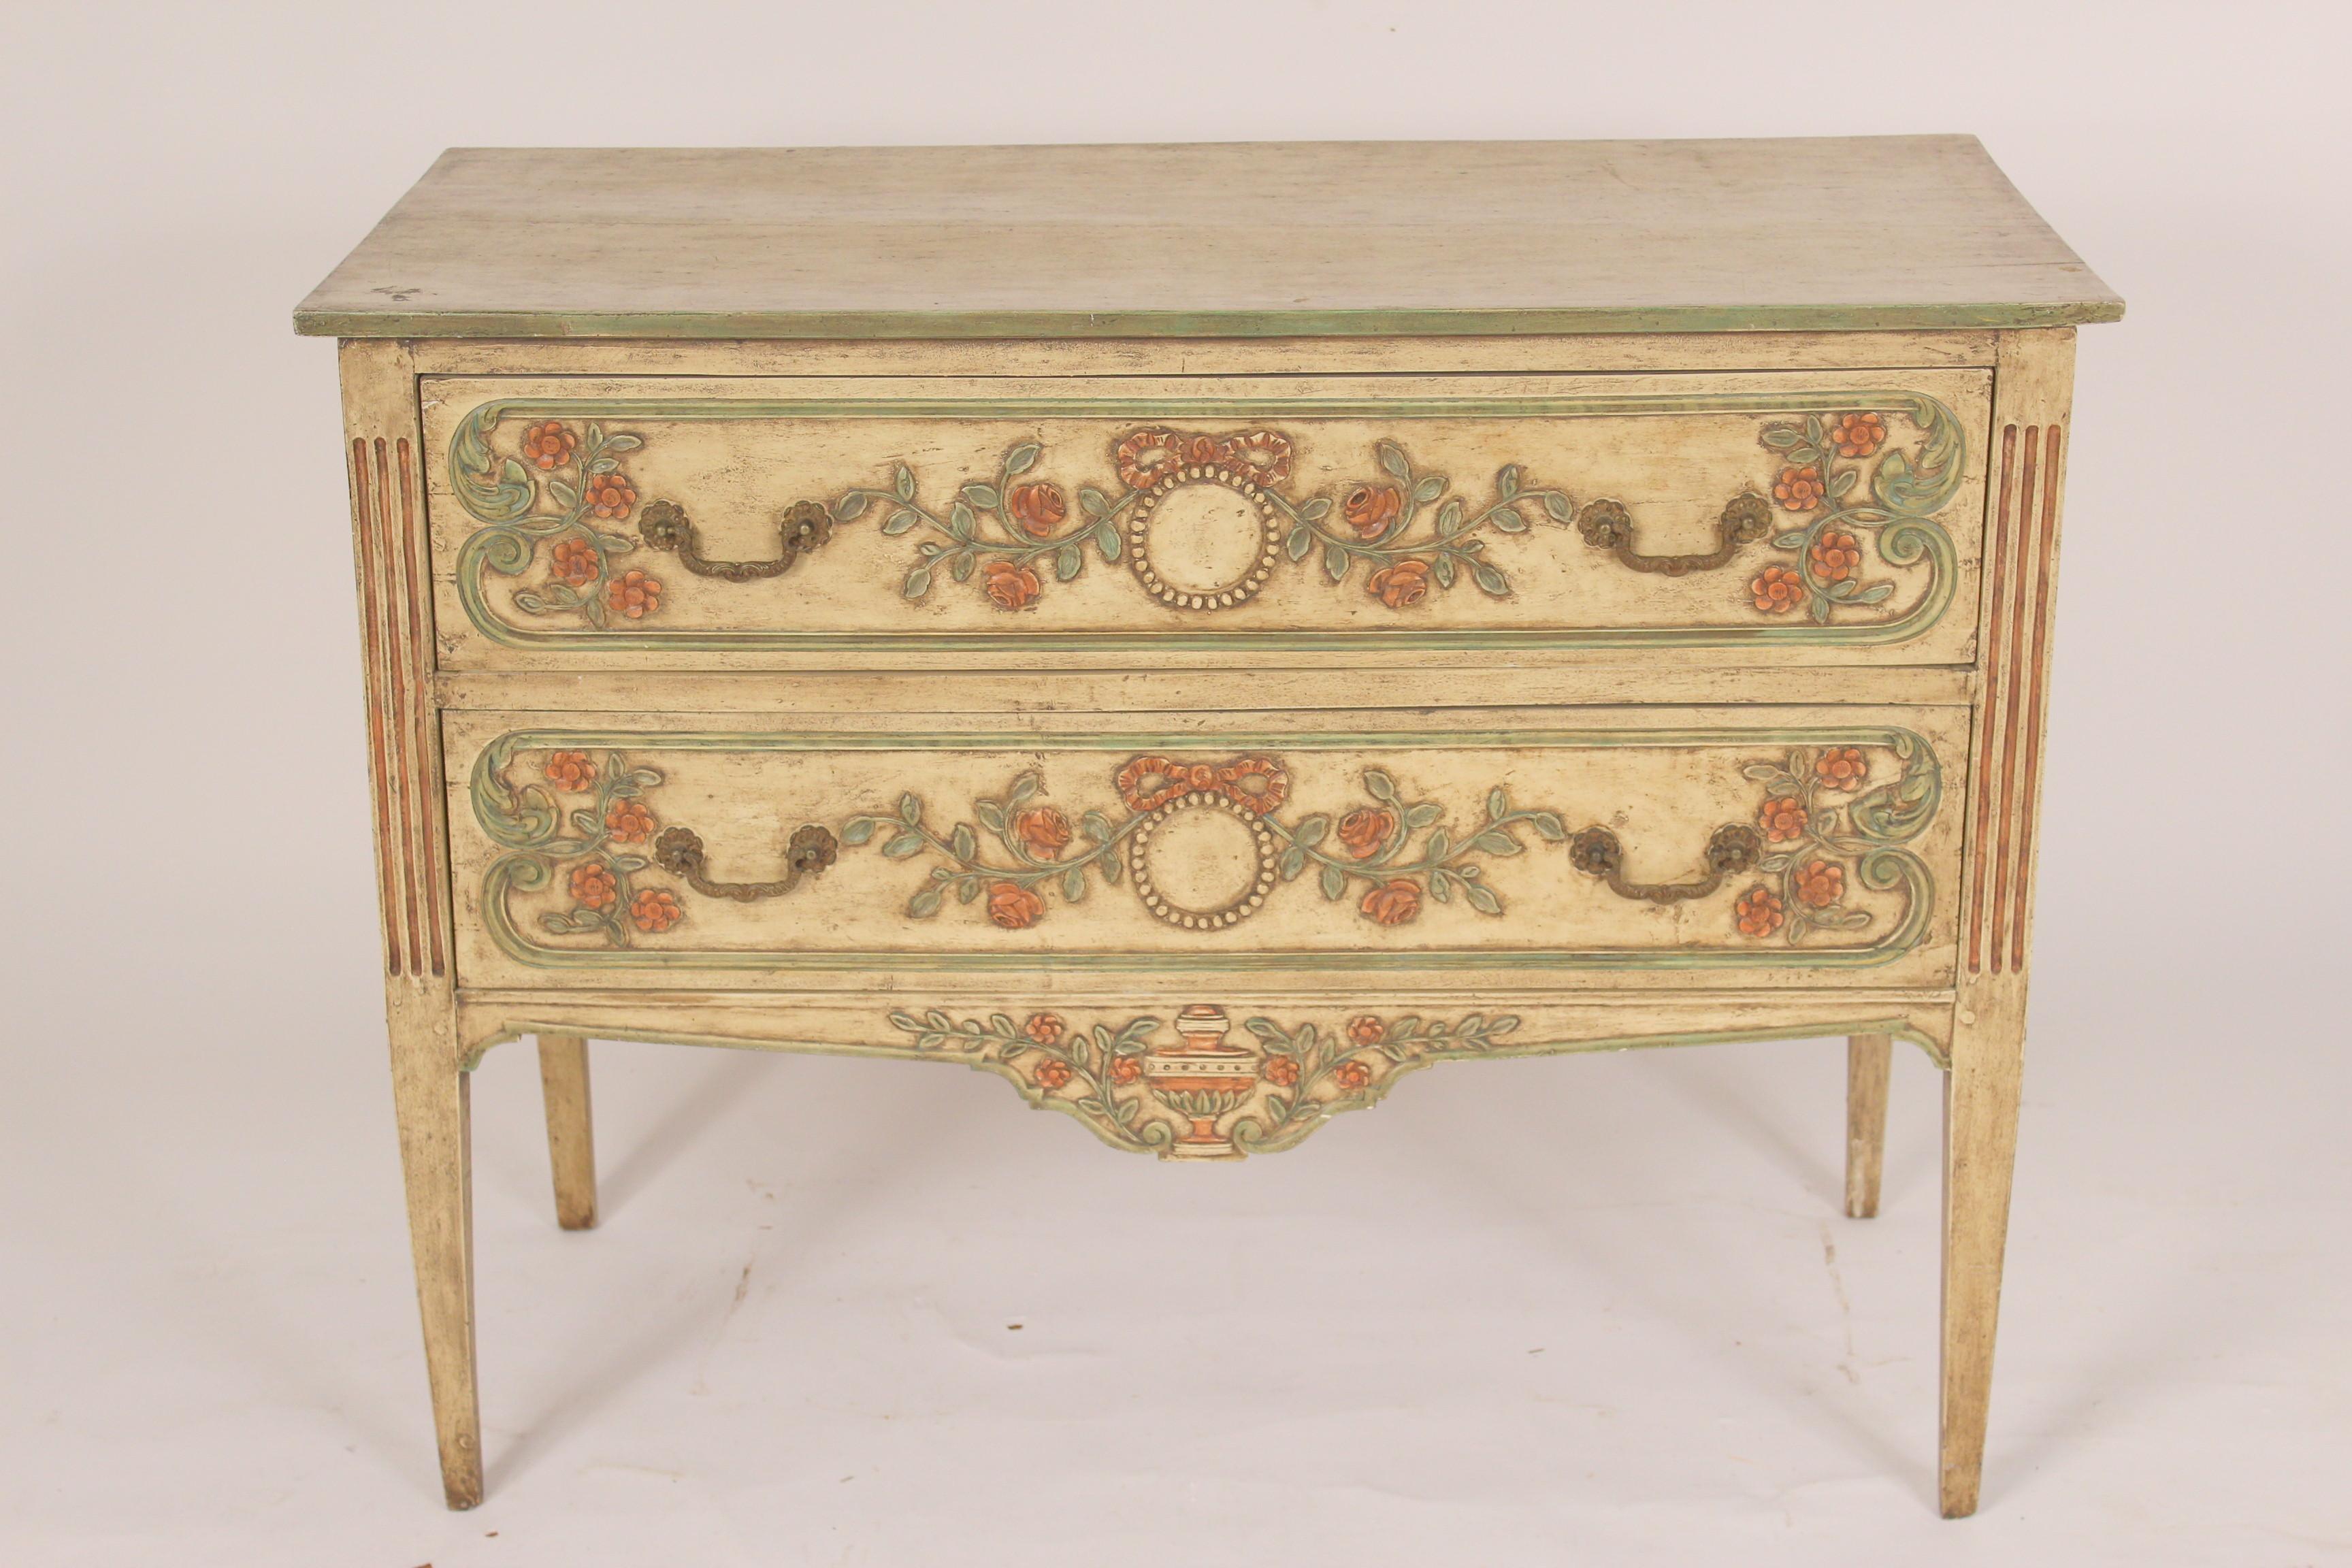 Continental (probably Italian) Louis XVI style painted chest of drawers, circa 1950's. Hand dovetailed drawer construction and mortise tenon and dowel construction.